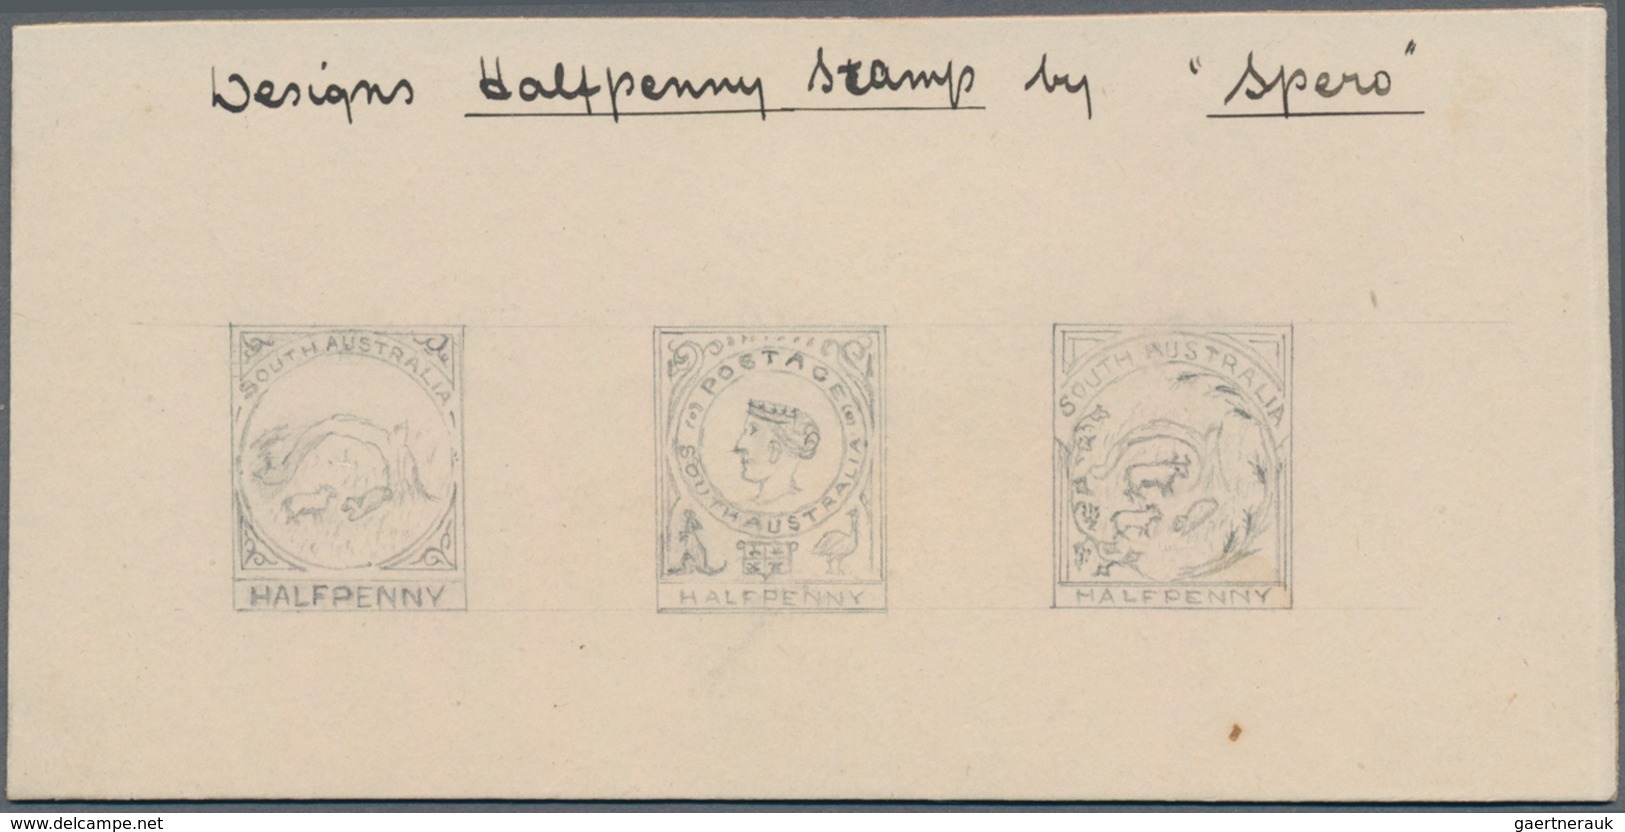 Südaustralien: 1890's, Stamp Design Competition Three Handpainted ESSAYS (each 19 X 23 Mm) In Pencil - Lettres & Documents